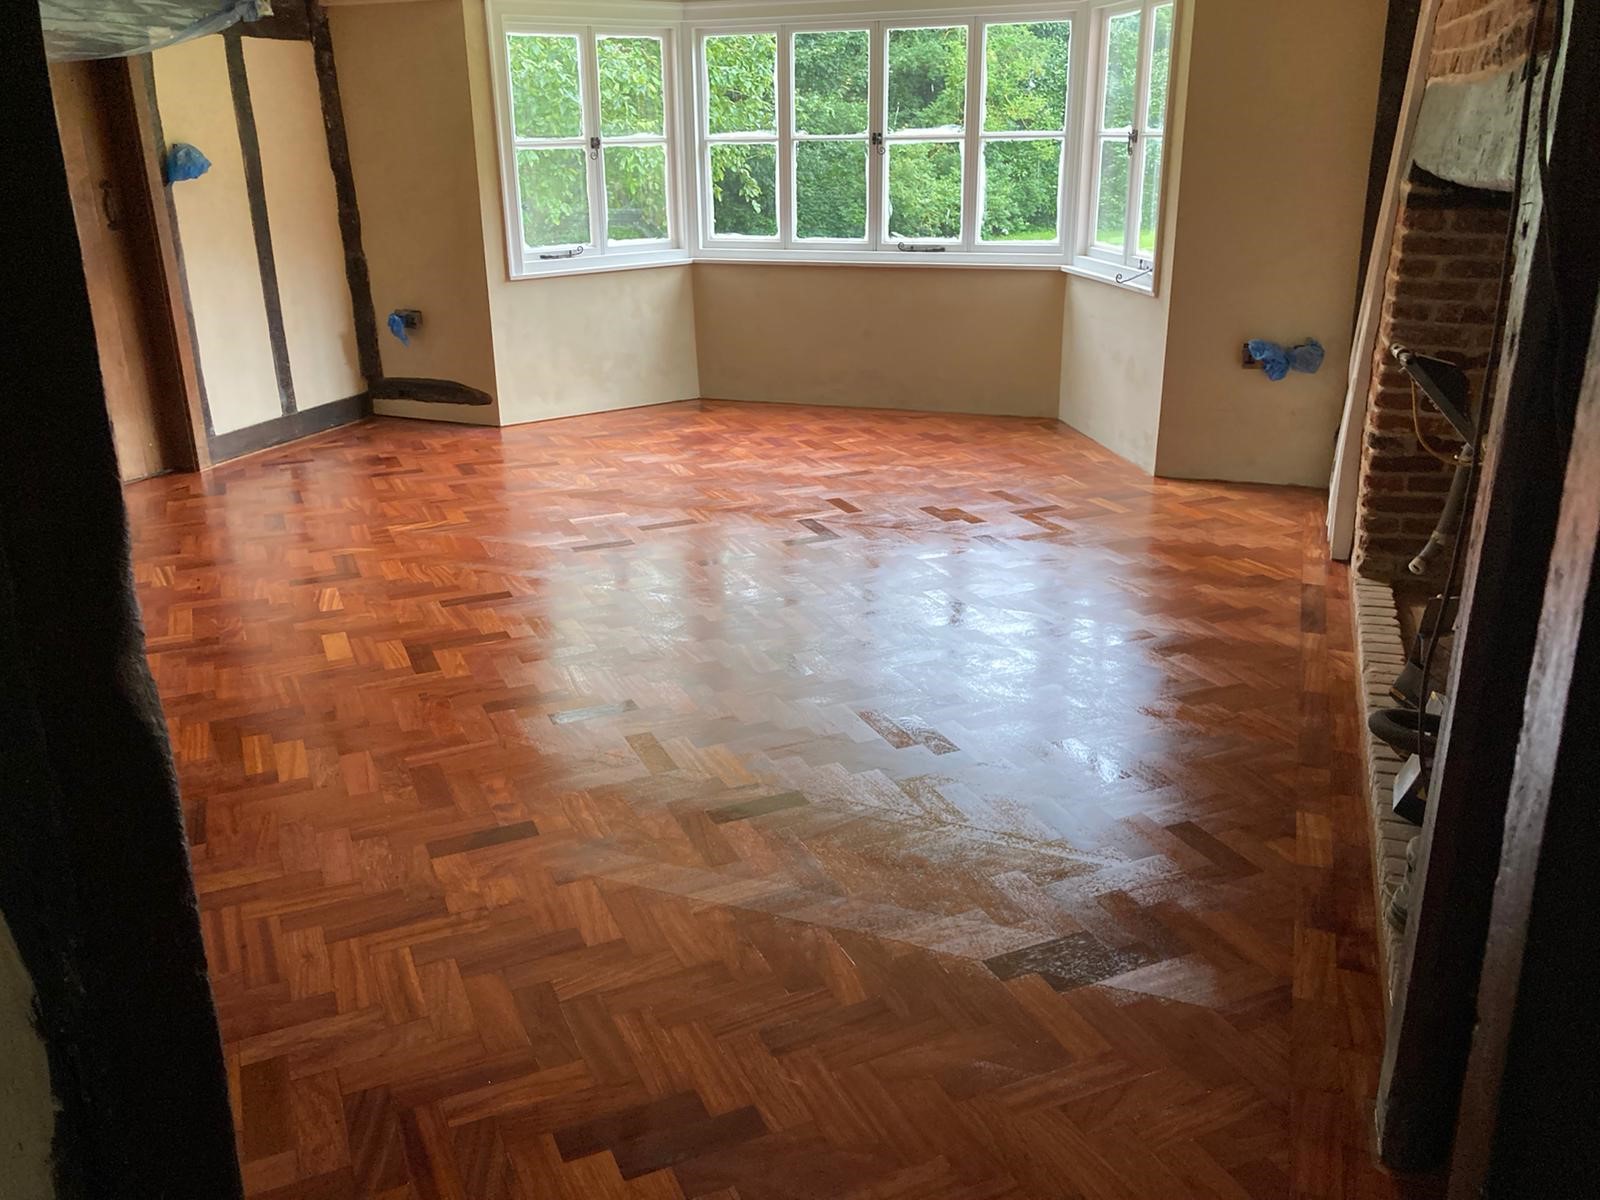 Listed Building Renovation Project - Parquet floor repair and refinish